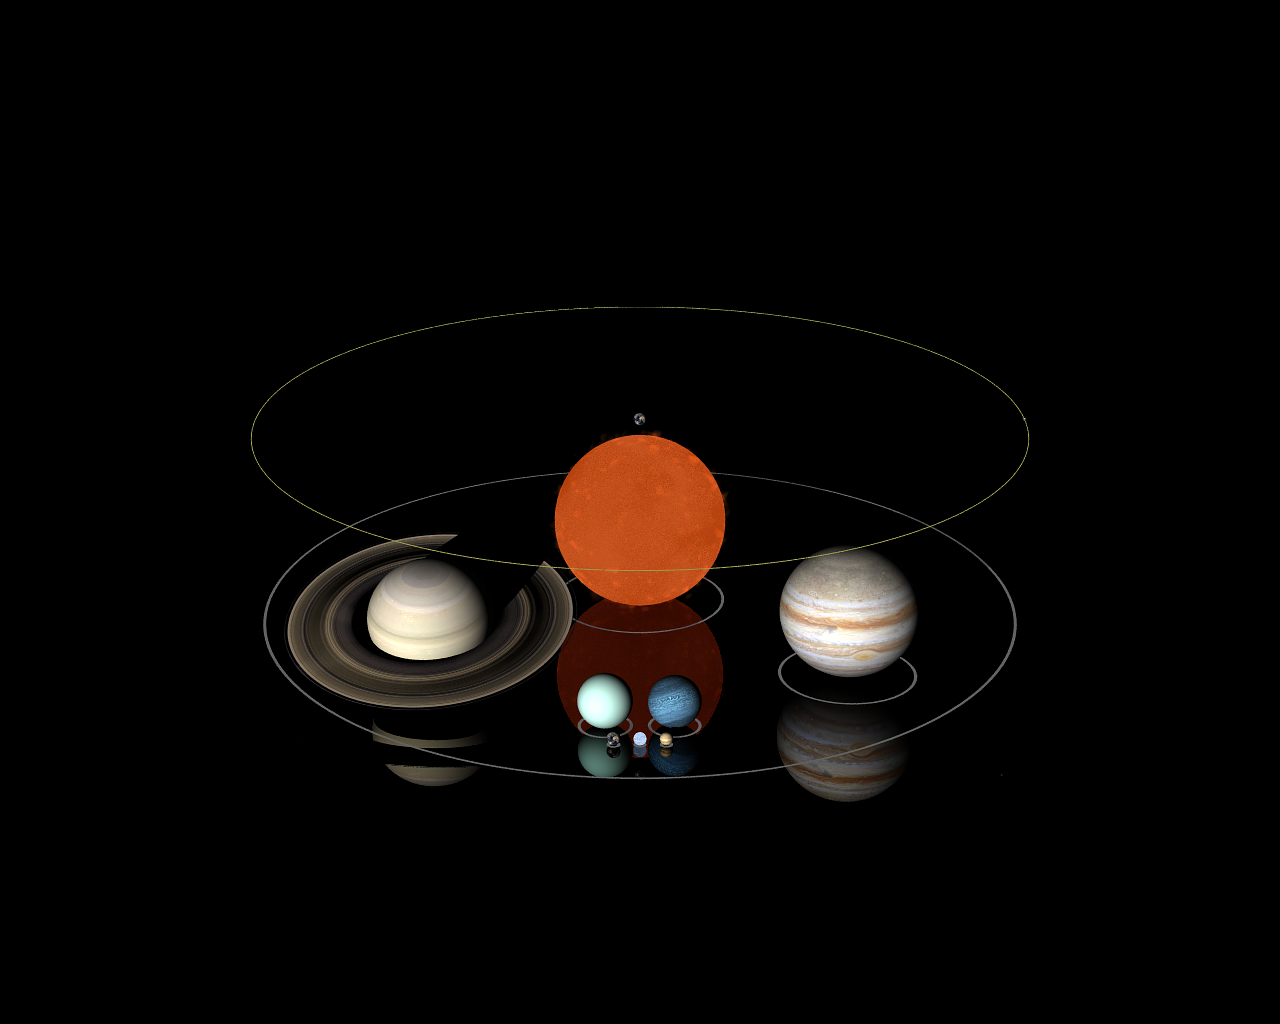 planet,planetary comparison,size comparison,space,space travel,mars,mercury,sun,earth,saturn,jupiter,free pictures, free photos, free images, royalty free, free illustrations, public domain